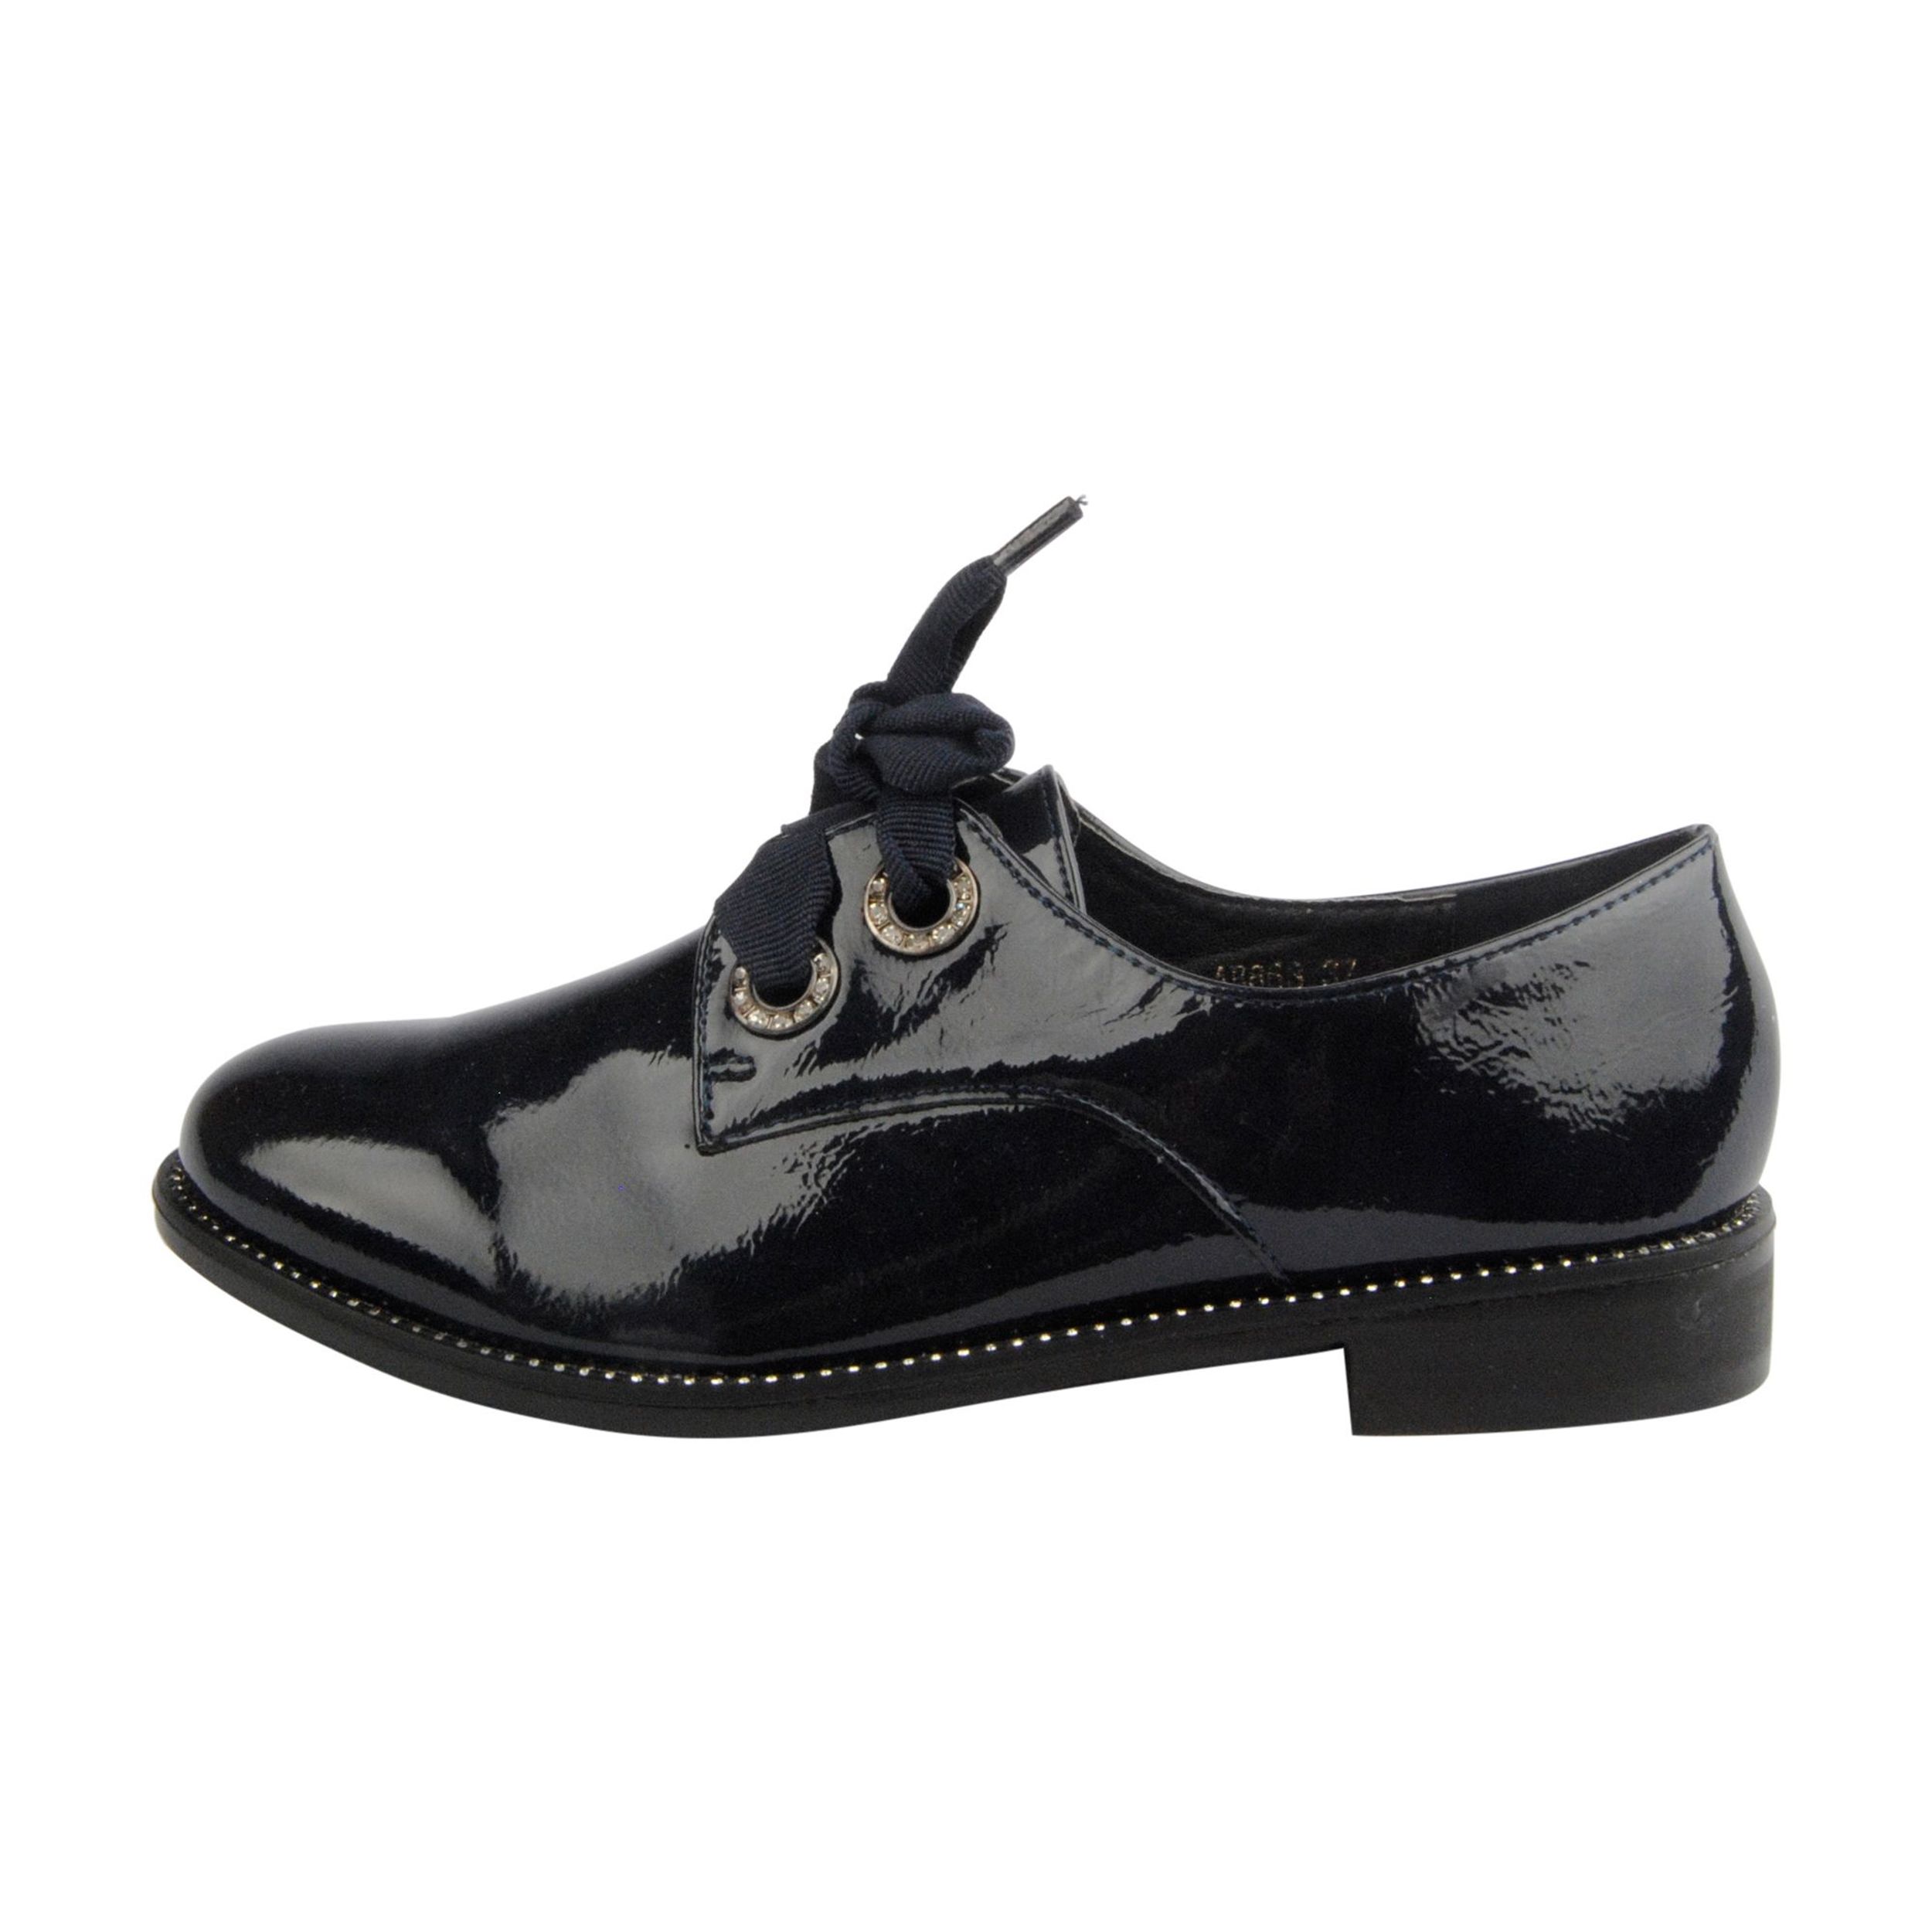 Lace Oxford Shoe and details in the eyelets. Anti-slip rubber floor. Interior exterior and template of synthetic material.